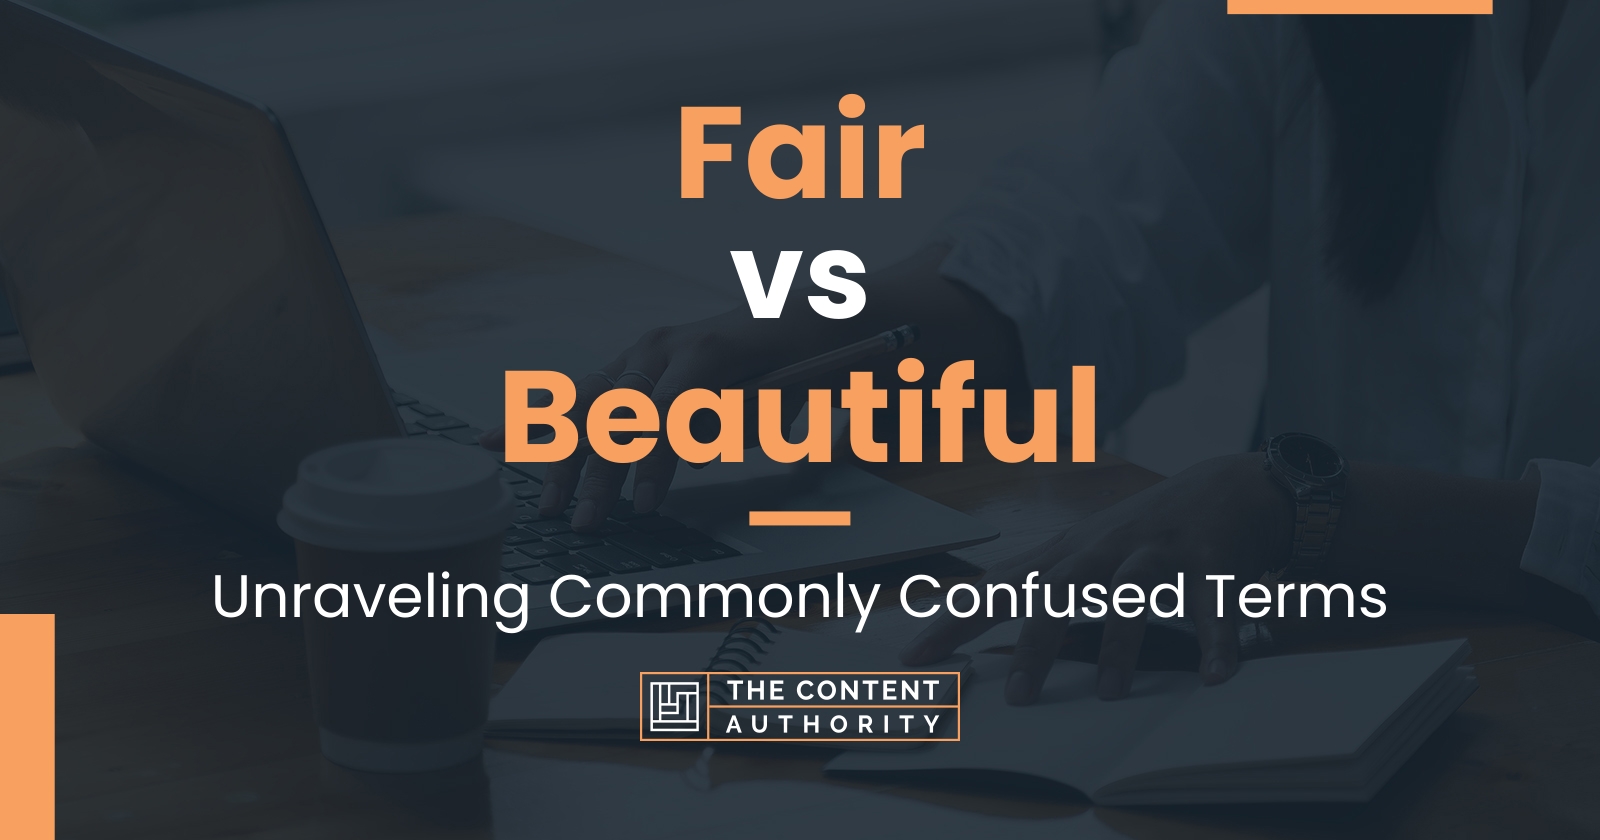 Fair vs Beautiful: Unraveling Commonly Confused Terms